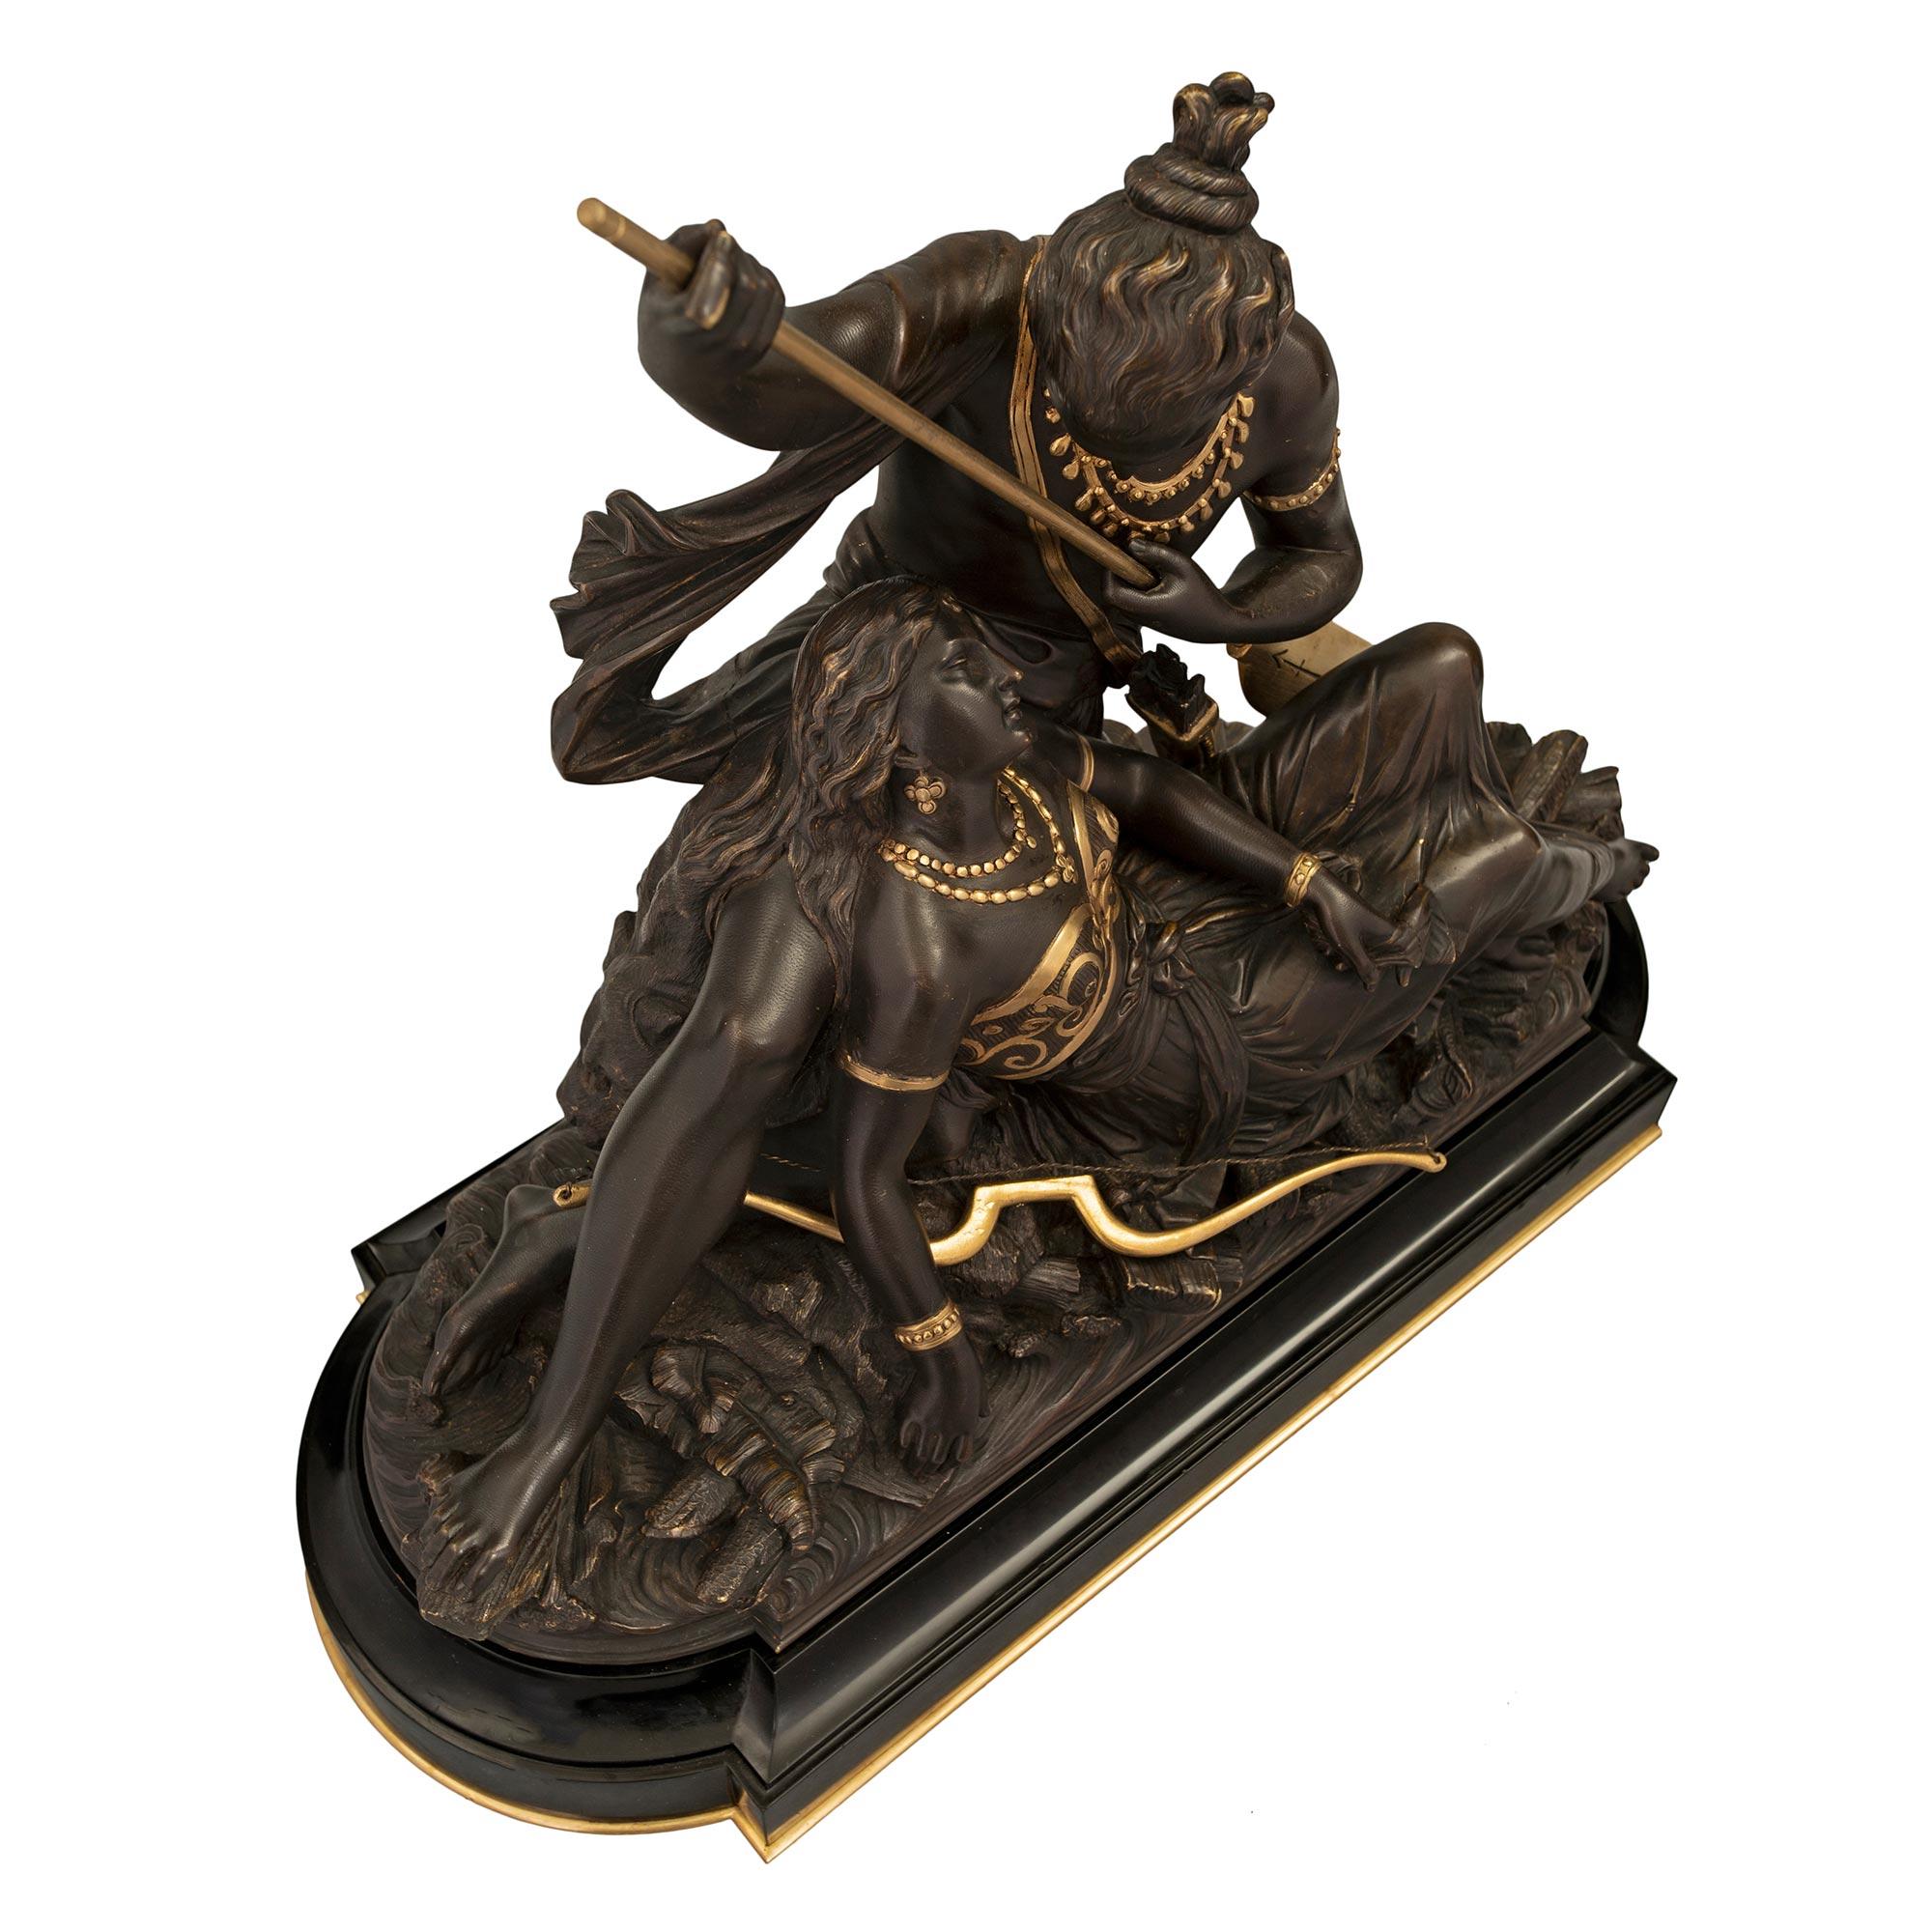 A sensational and high-quality French 19th-century patinated bronze and a gilt statue of native American lovers signed D. Marie. The bronze is raised on a black Belgium marble base, decorated by an ormolu bottom band and a concave mottled edge. The